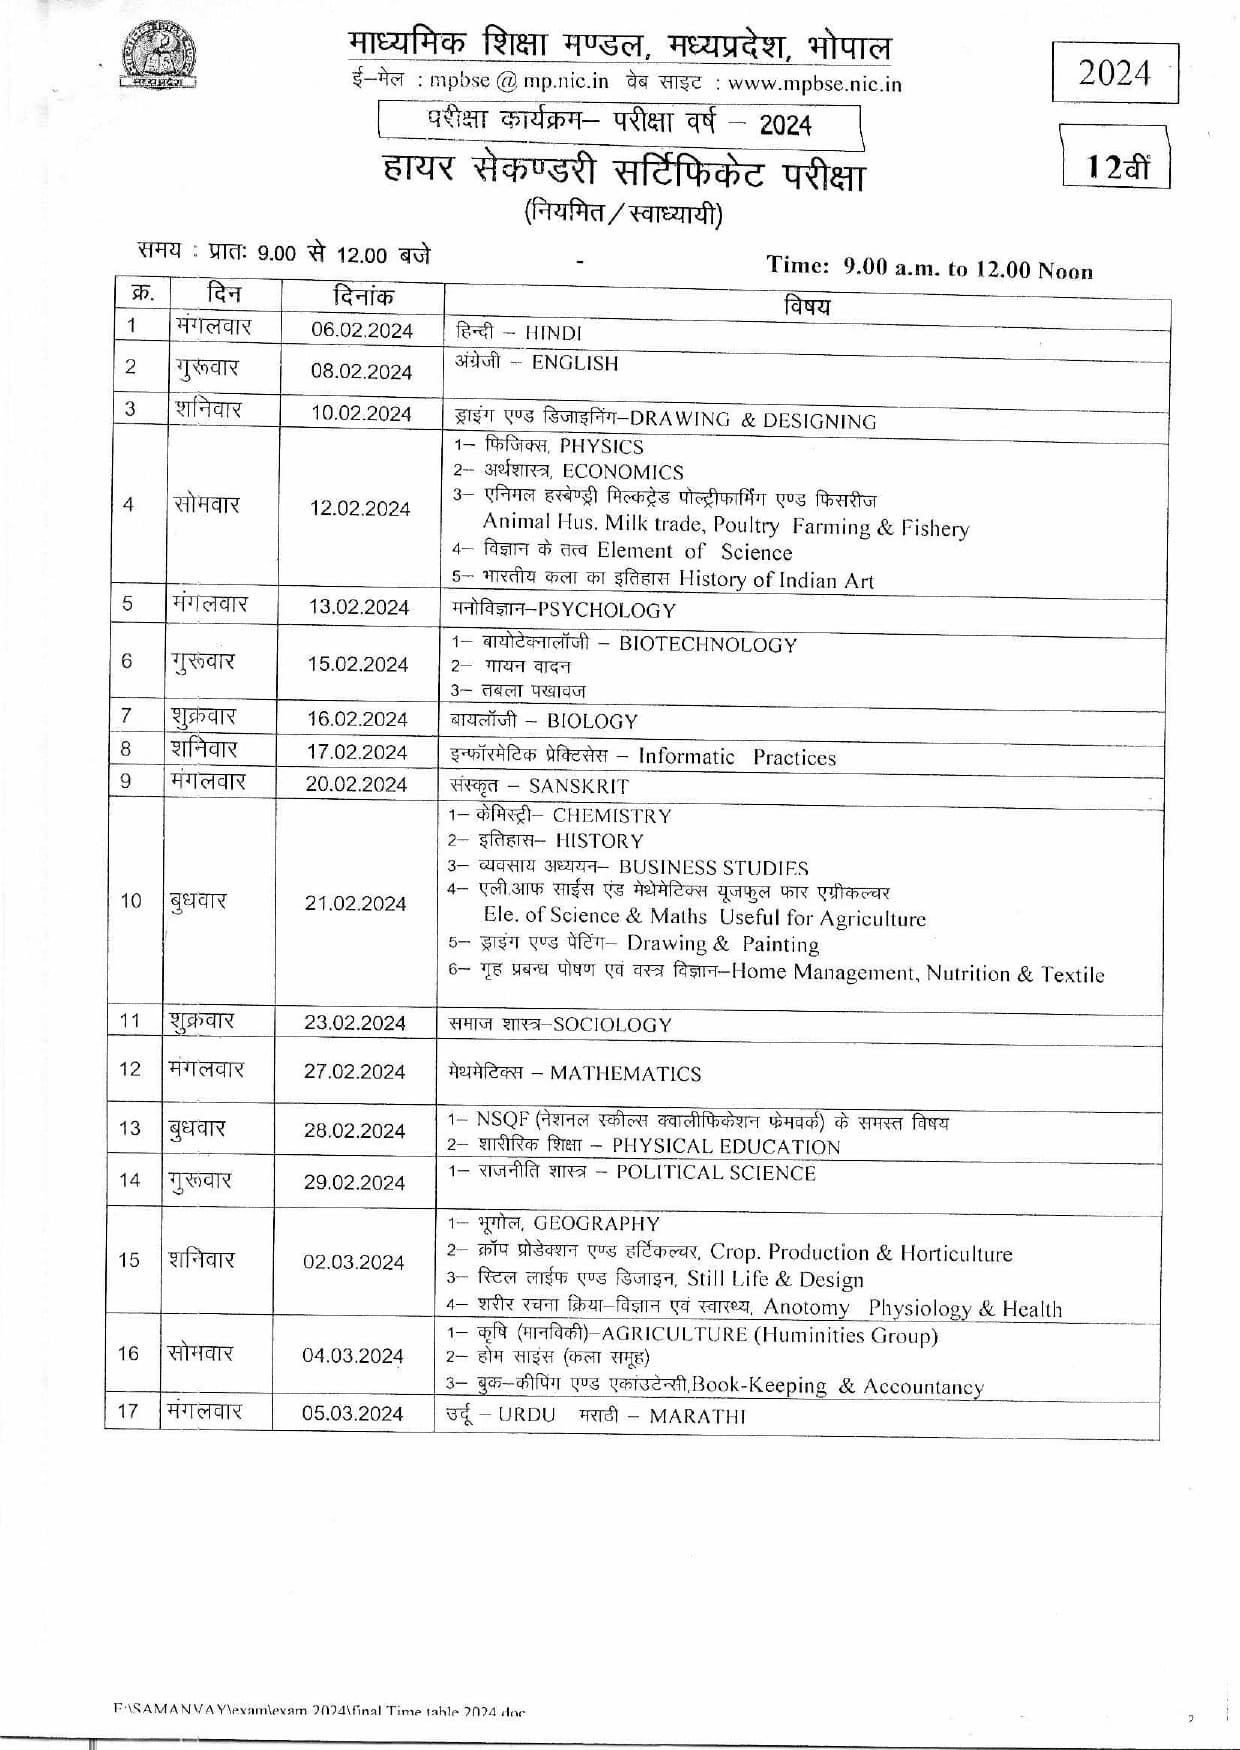 MP board time table 2023 class 12 pdf download